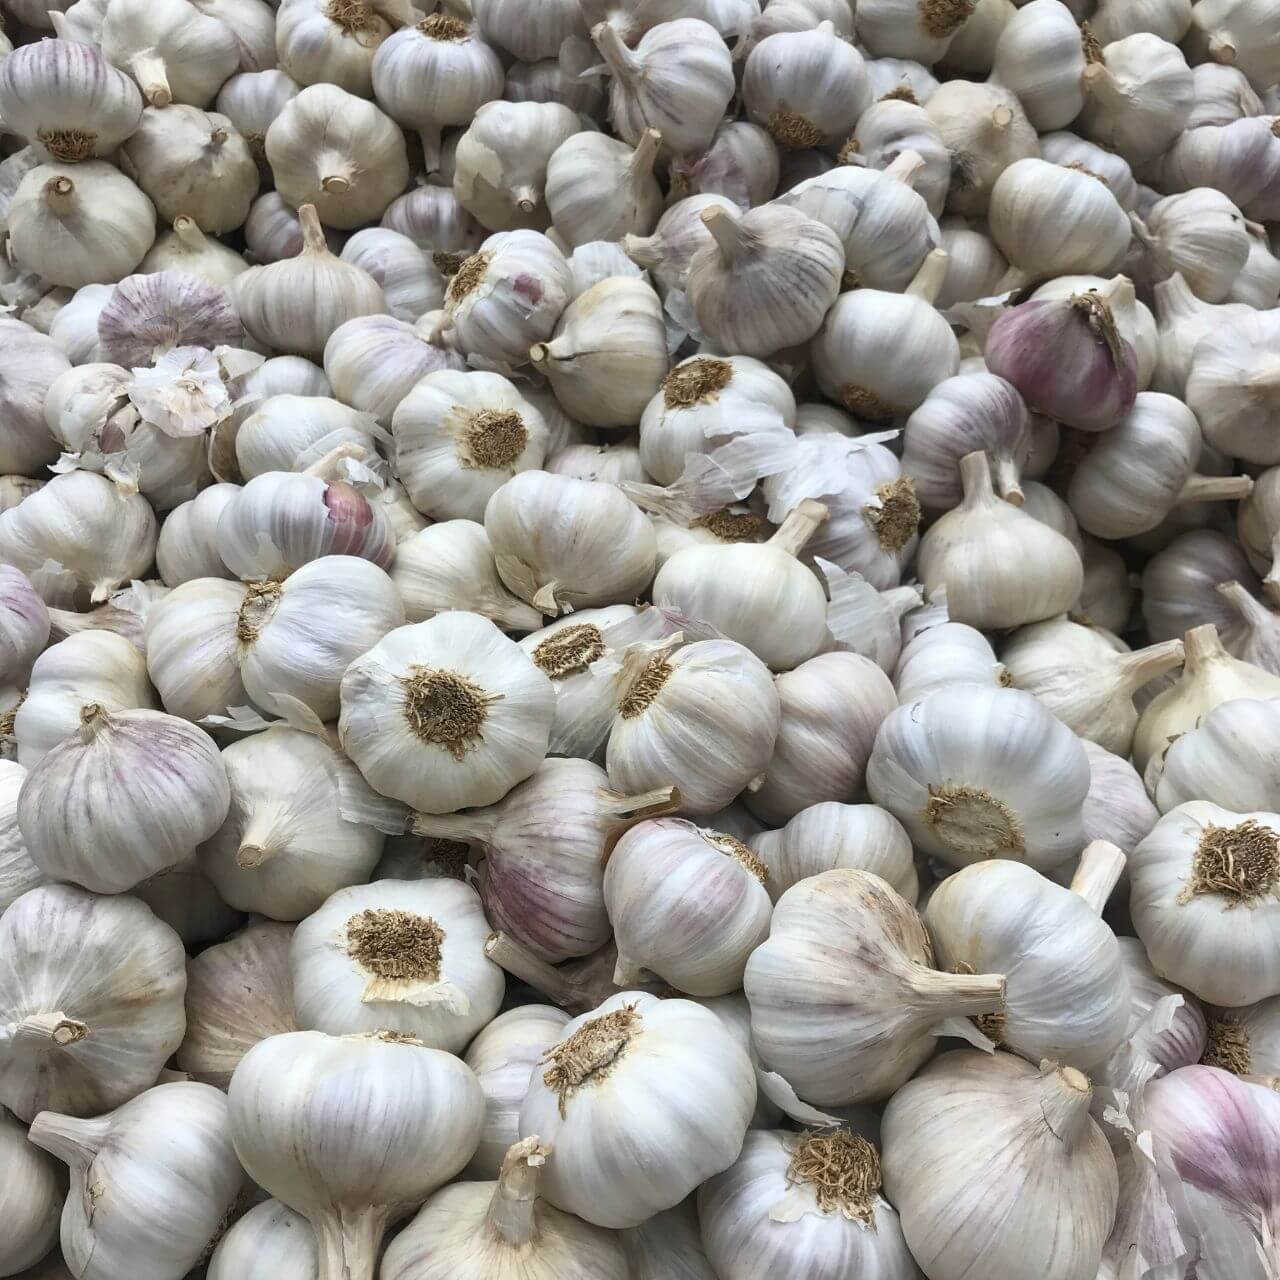 Bulk pure fresh garlic, carefully selected and sourced for its quality, flavor, and aroma.